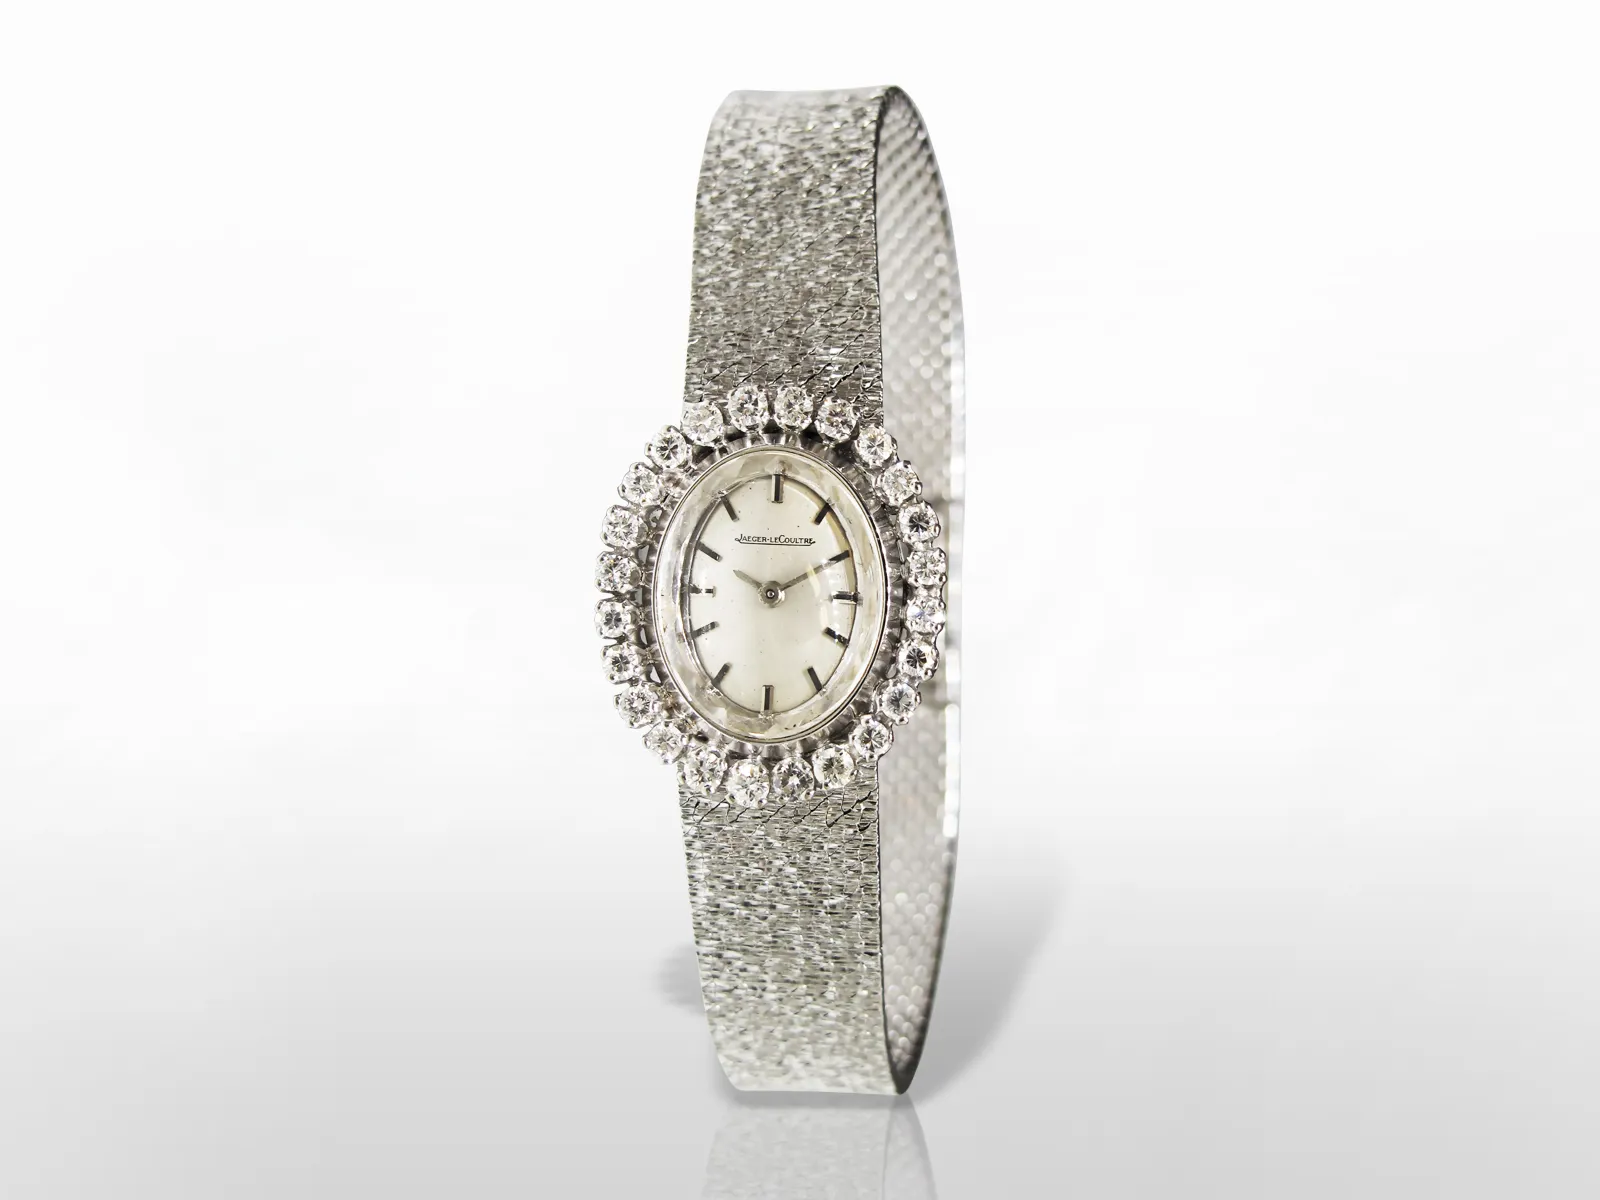 Jaeger-LeCoultre 20mm White gold and diamond-set Silver